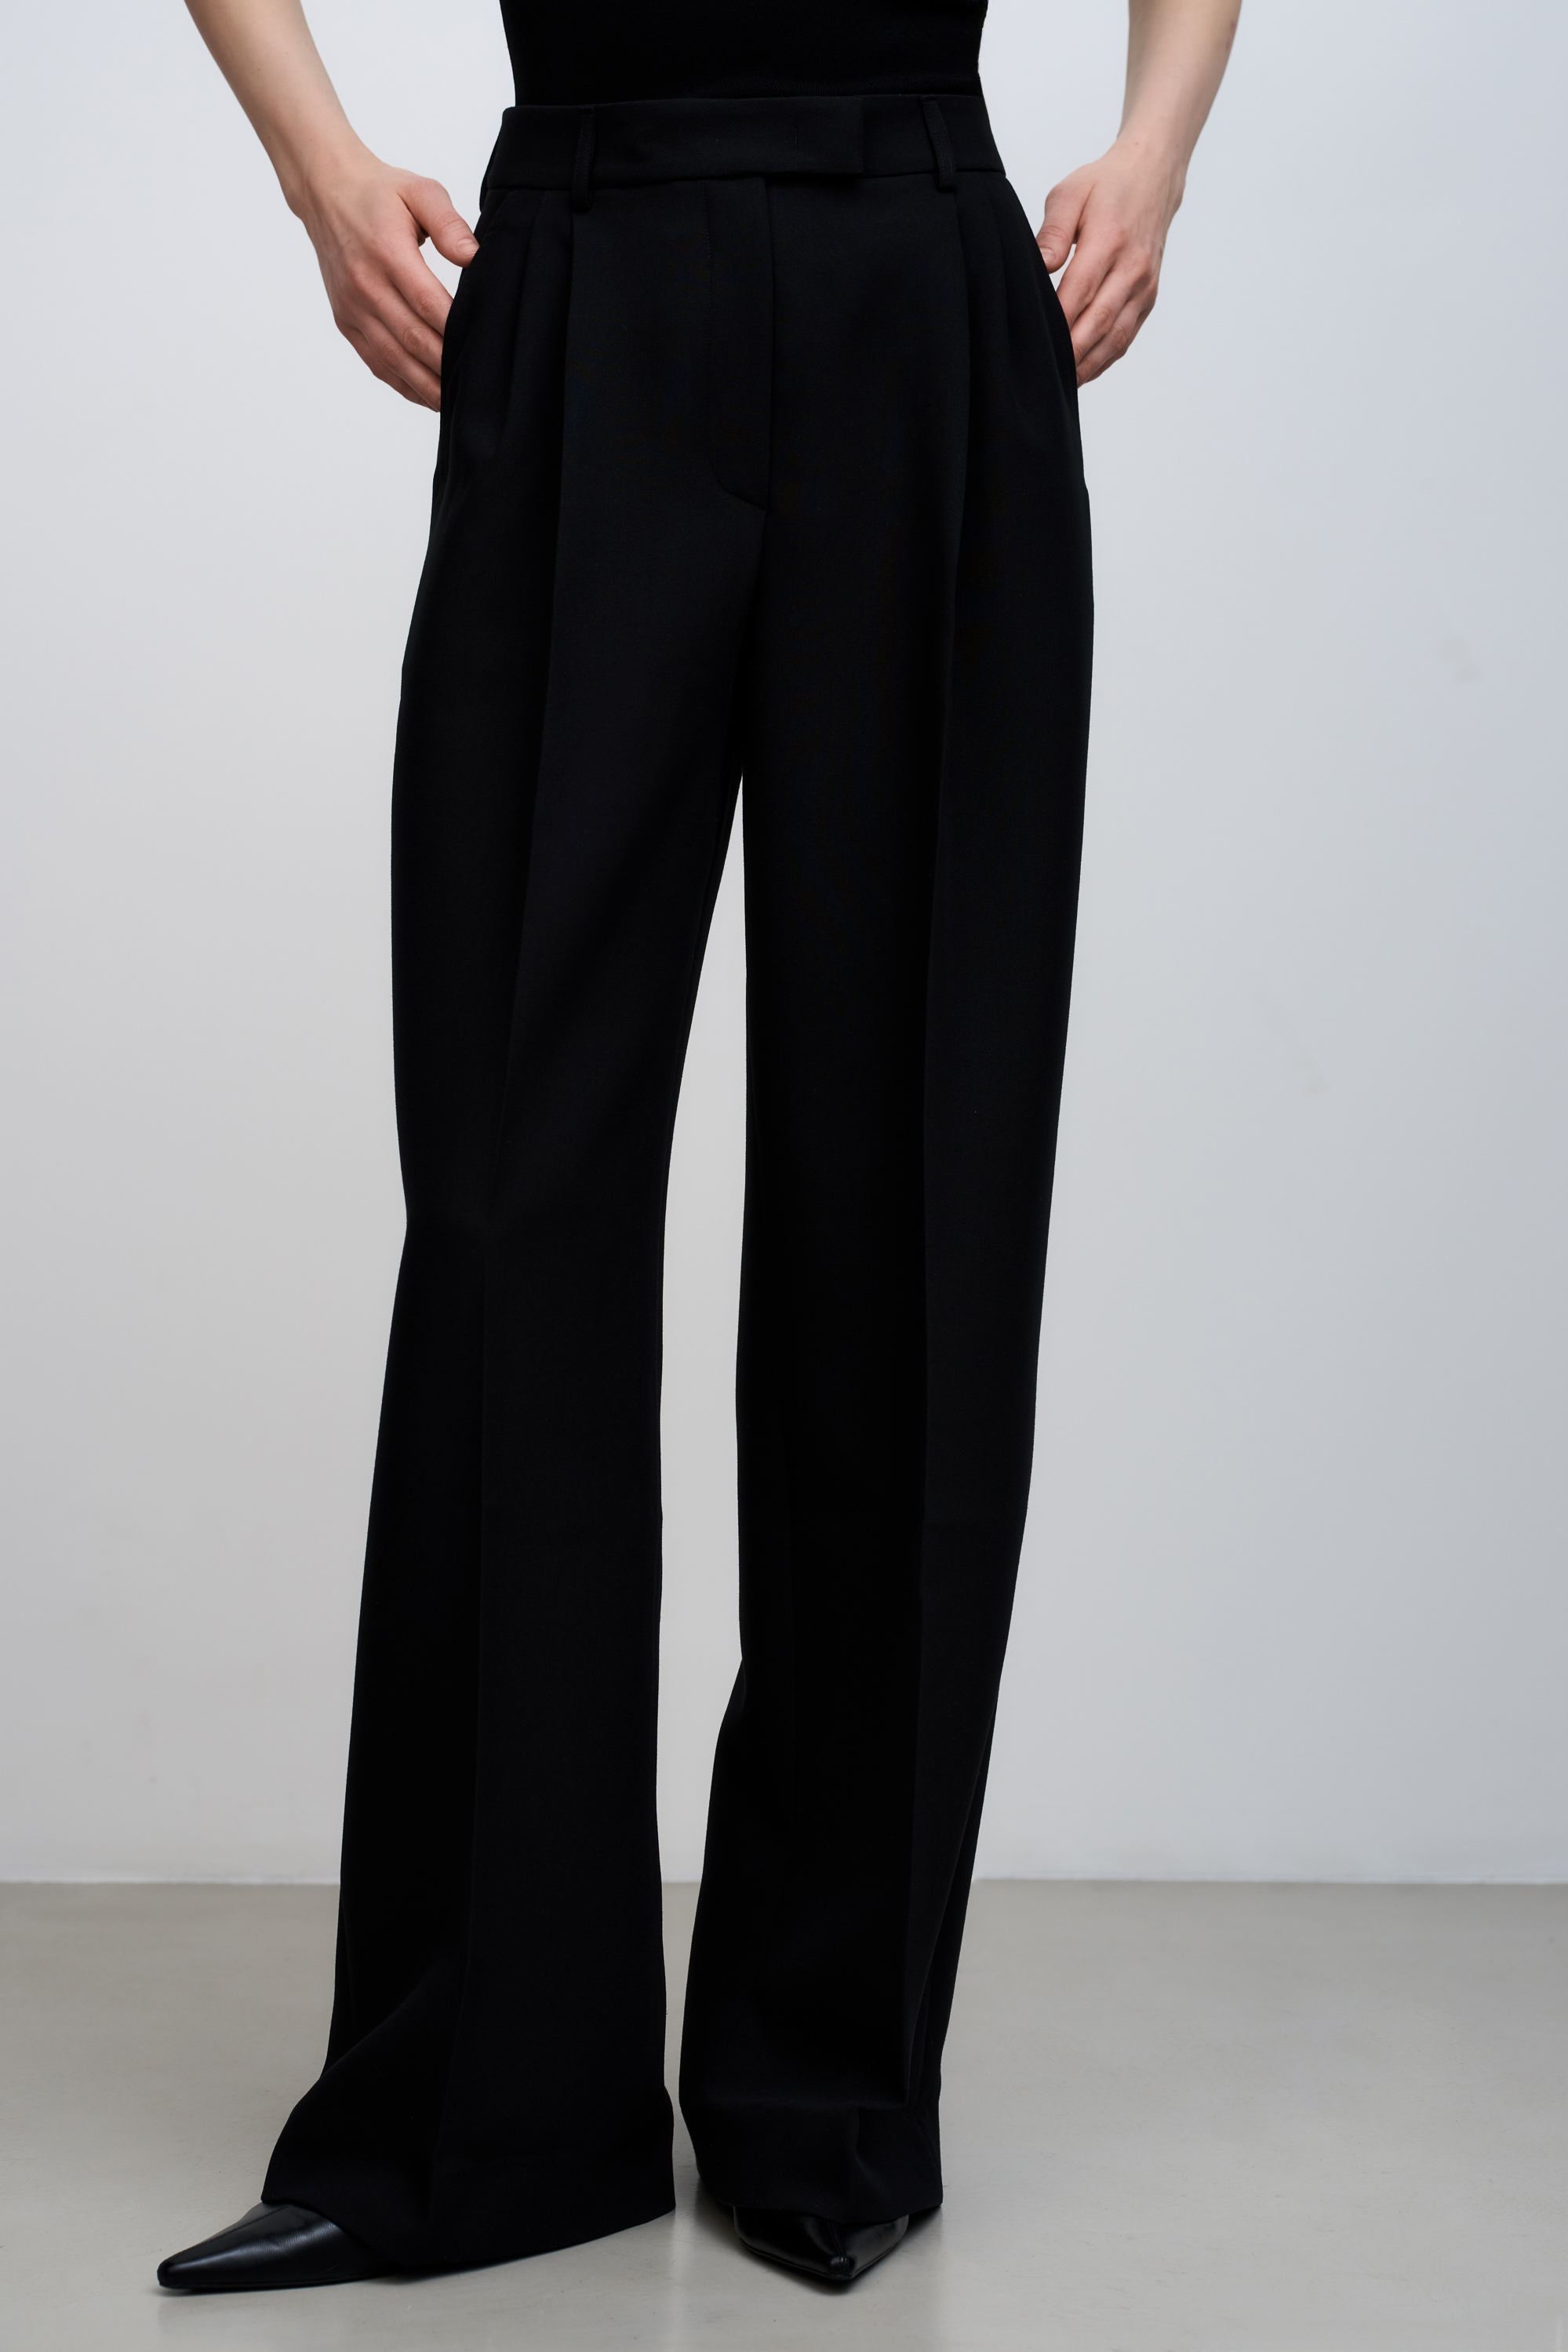 Trousers 4380-01 Black from BRUSNiKA